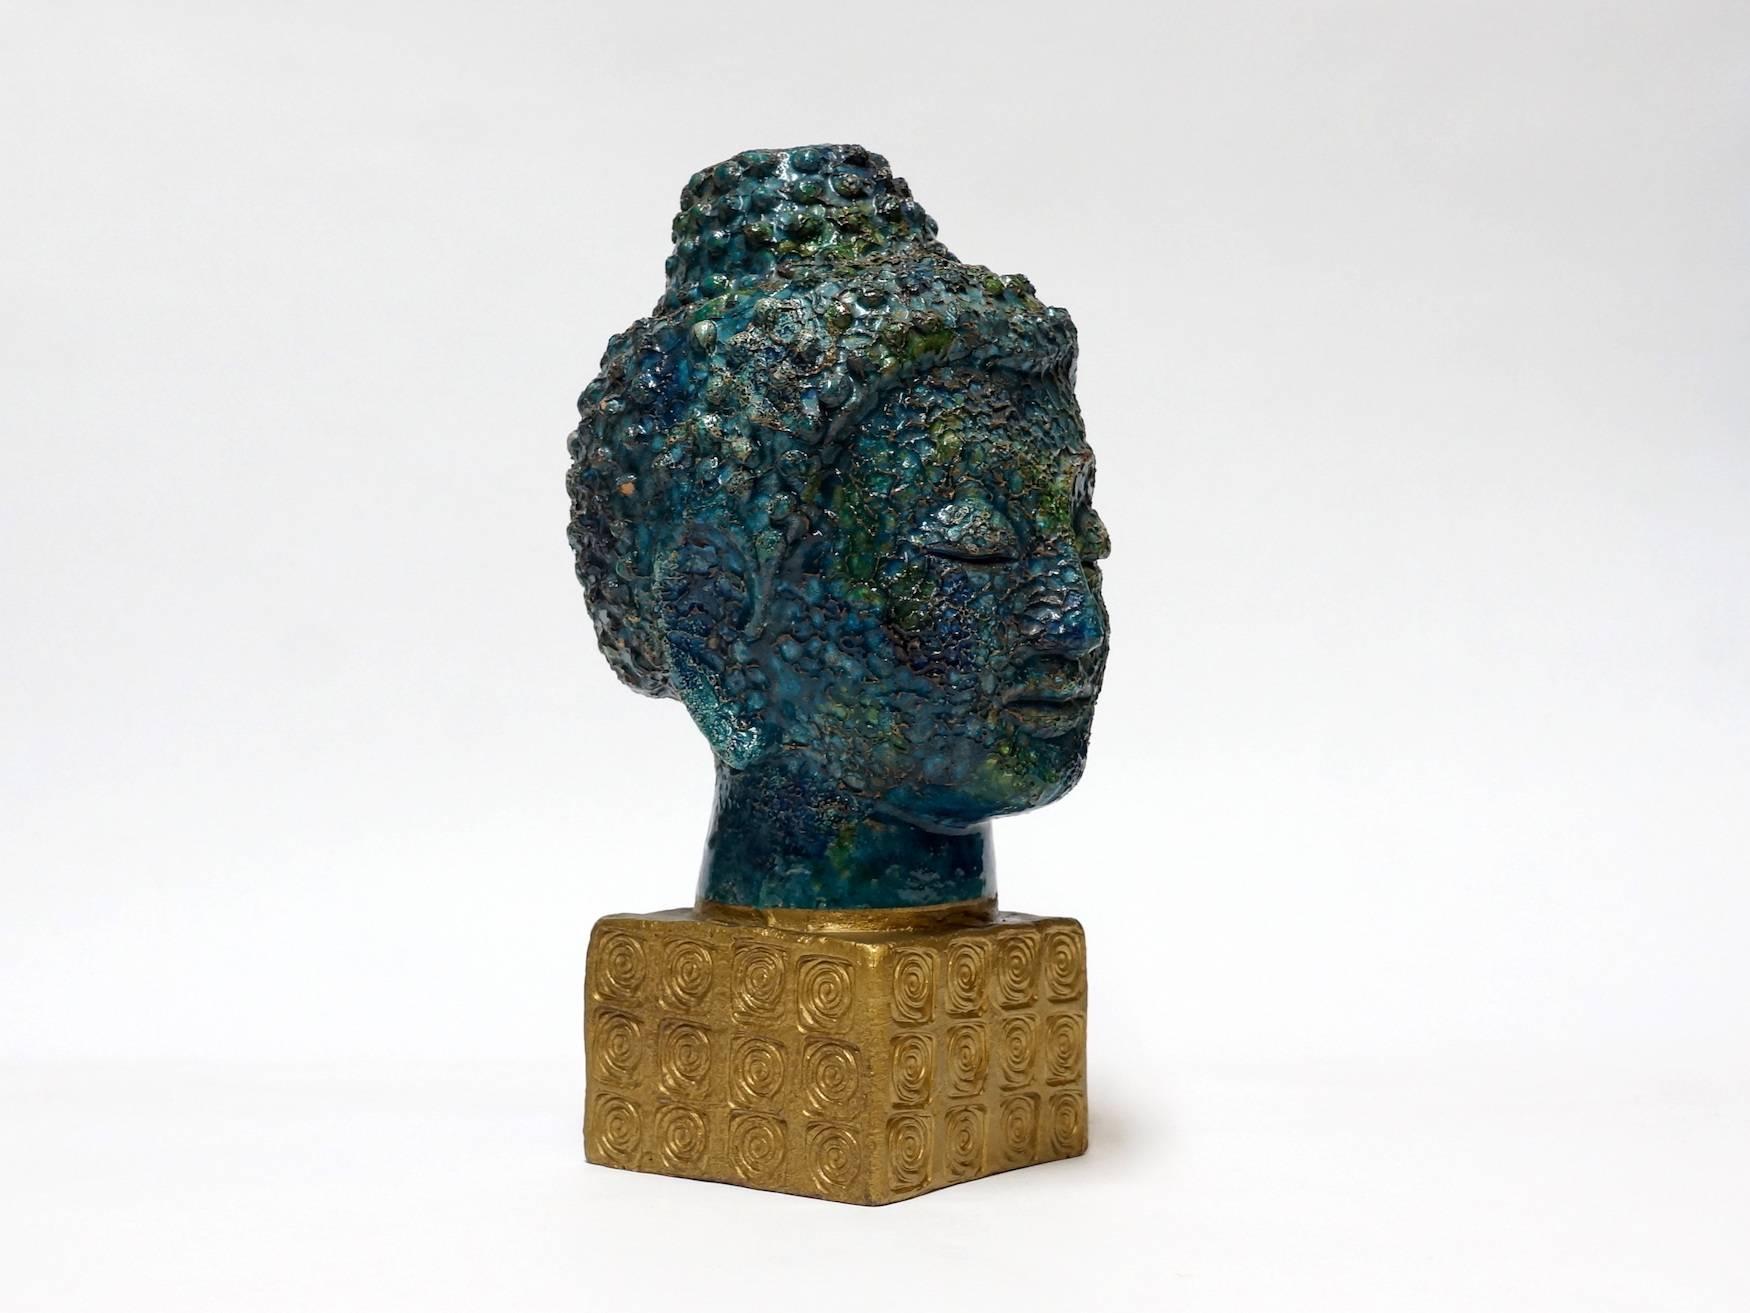 Aldo Londi Buddha head sculpture for Bitossi Italy, made in the 1960s as part the "Cinese" [Chinese] series with Asian inspired pieces.
The mottled, bubbled and textured green, copper-brown and blue glaze was inspired by ancient Chinese